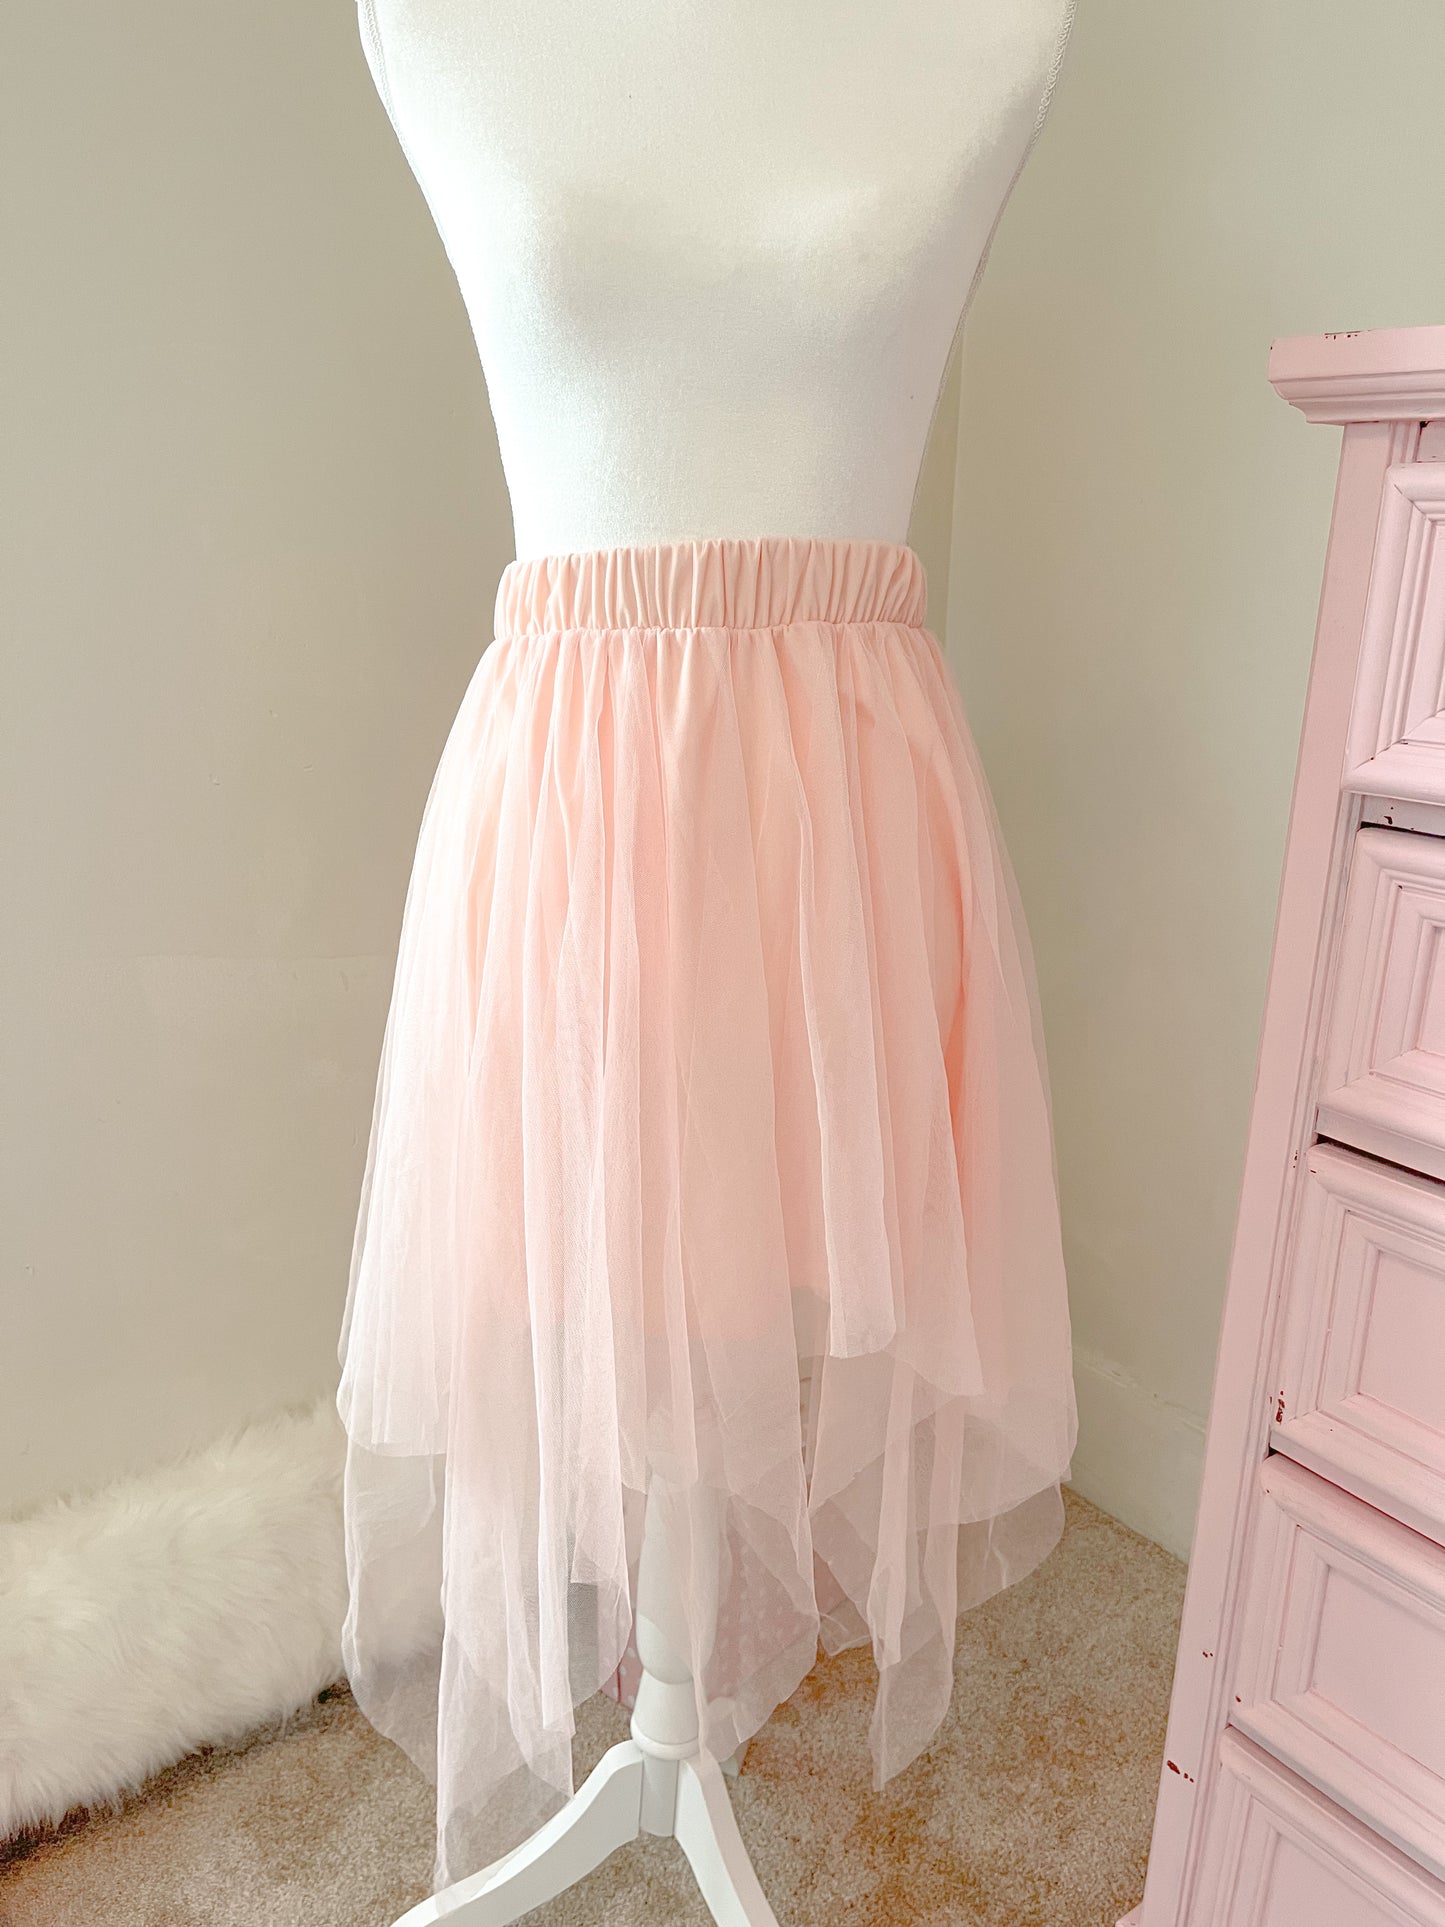 Coral Pink Tulle Skirt Size Small Women’s